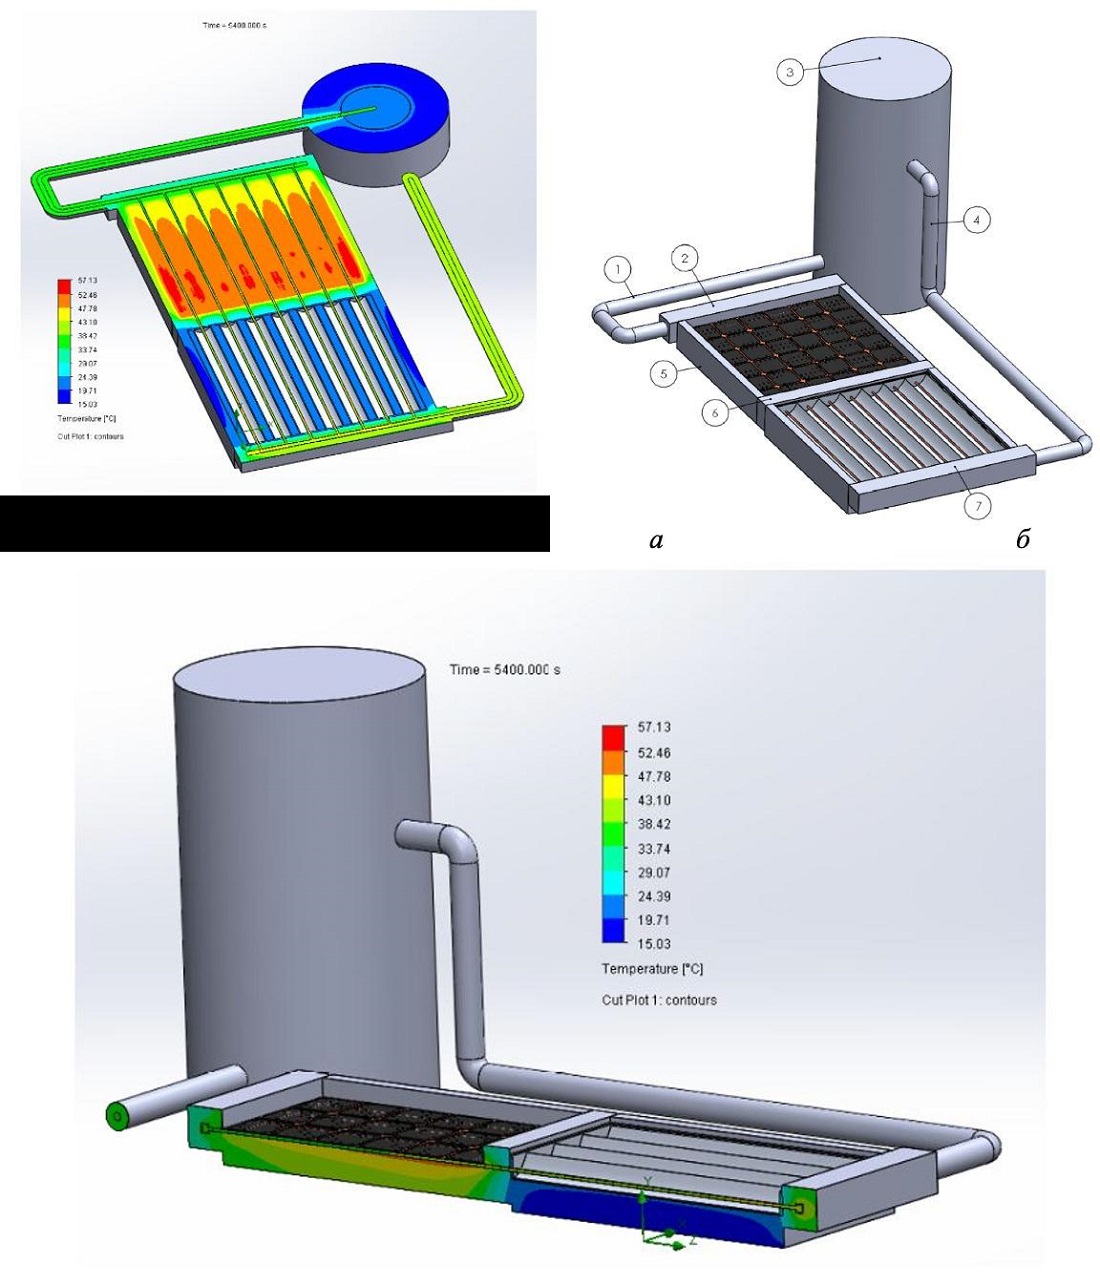 Development of a combined system with a hybrid solar collector and determination of its thermal characteristics